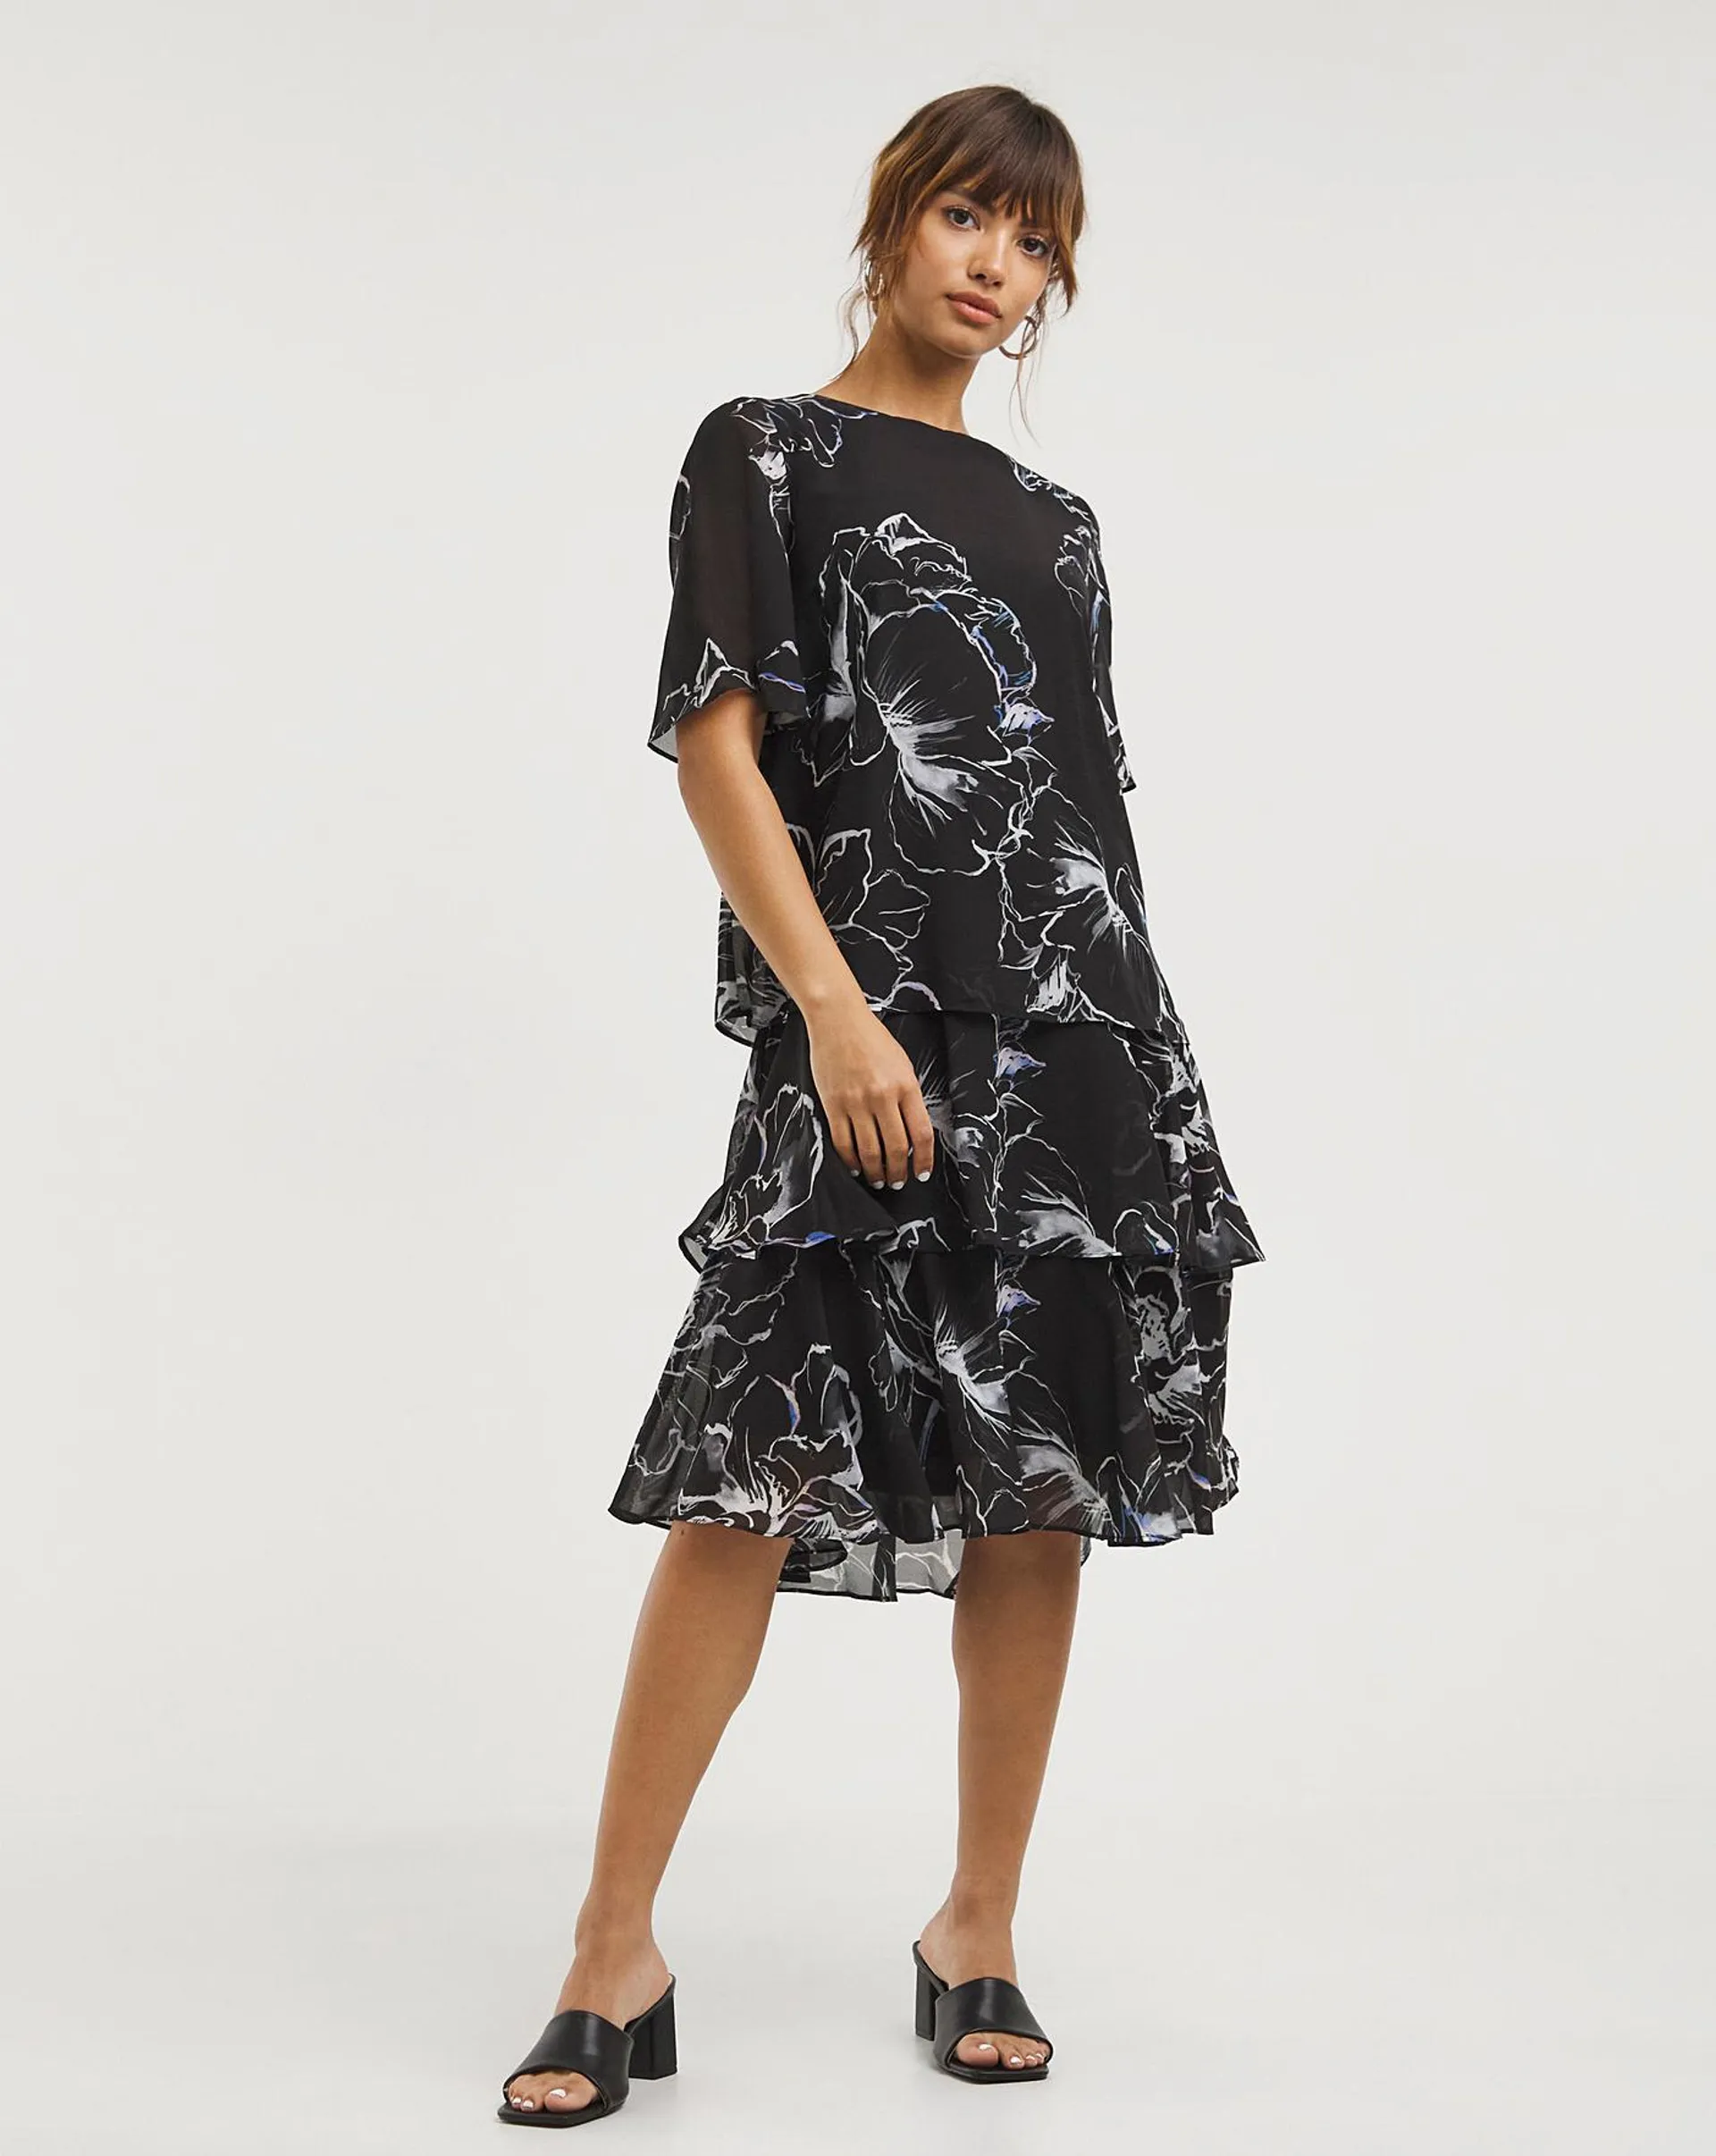 Joanna Hope Mono Floral Tiered Layer Printed Dress